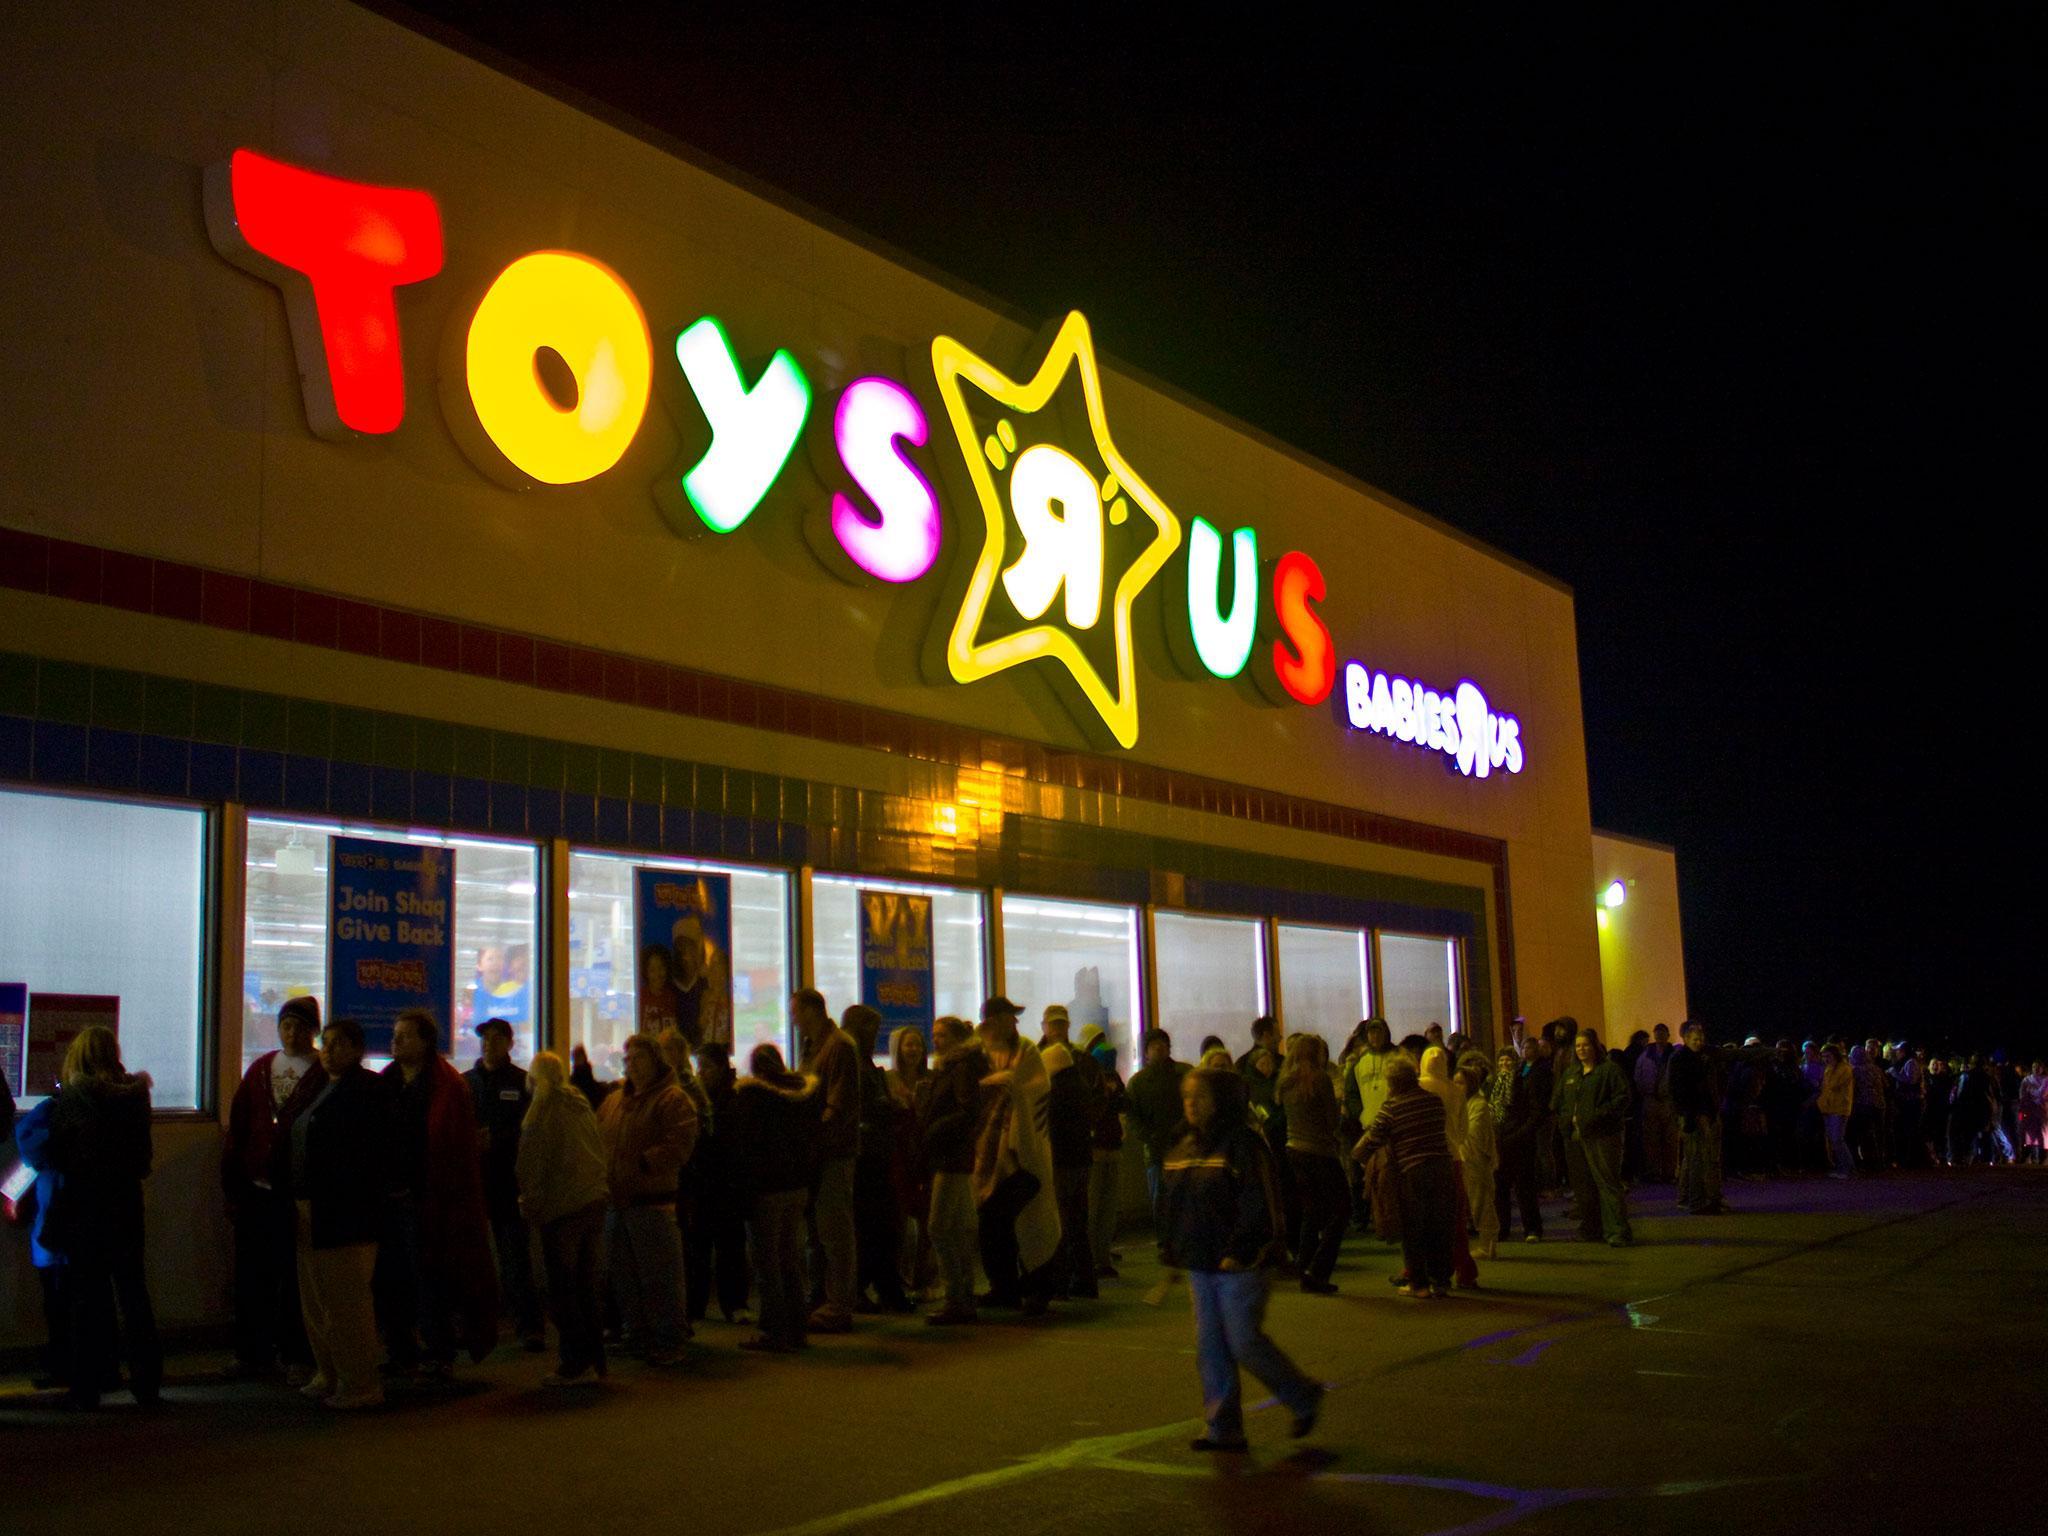 Toys R Us and Maplin collapse into administration putting over 5,000 jobs at risk